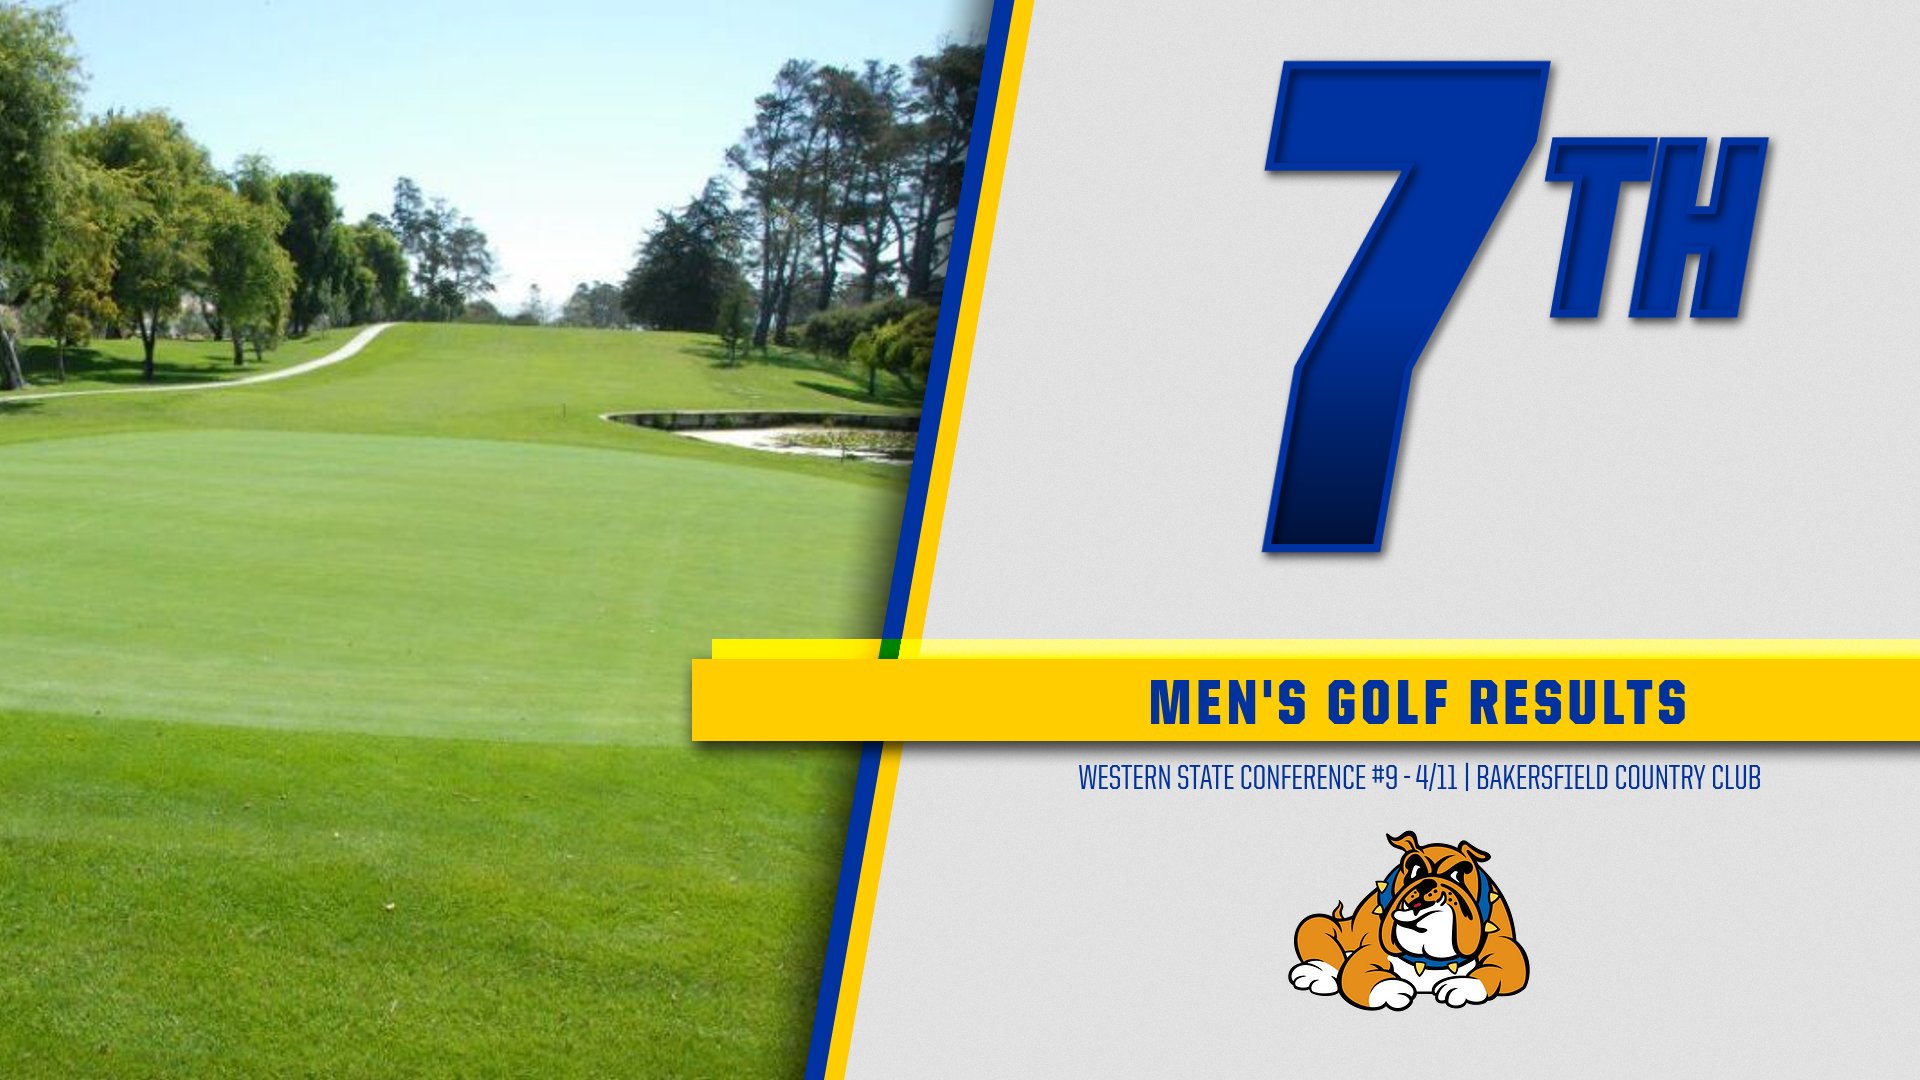 Golf Lands in Seventh at WSC No. 9